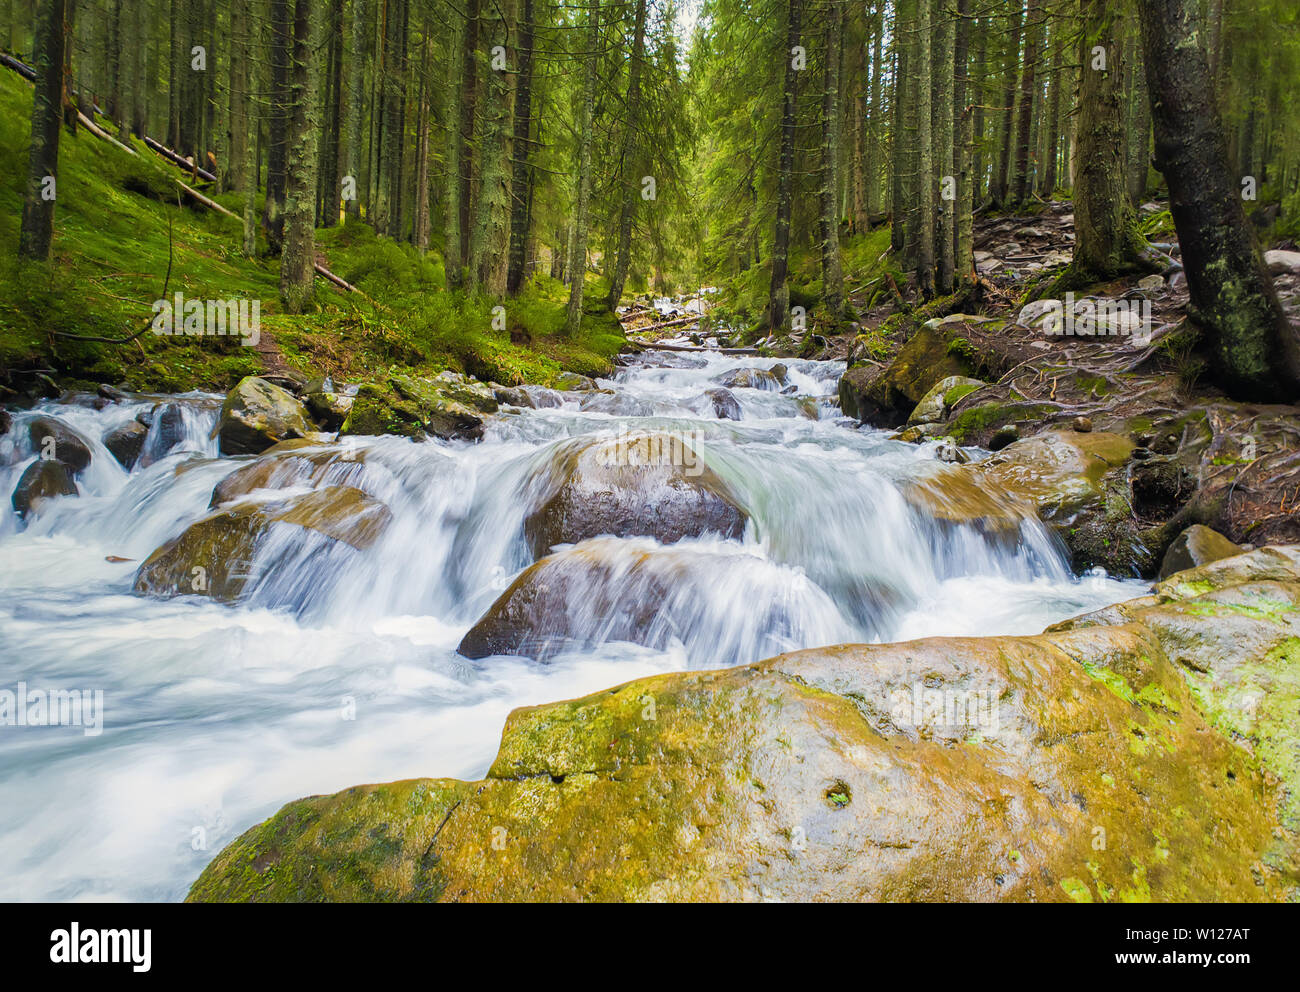 Prut river flowing through the coniferous forest on the hills of Carpathian Mountains, Hoverla National Park, Ukraine. Wild nature scene, fast water s Stock Photo